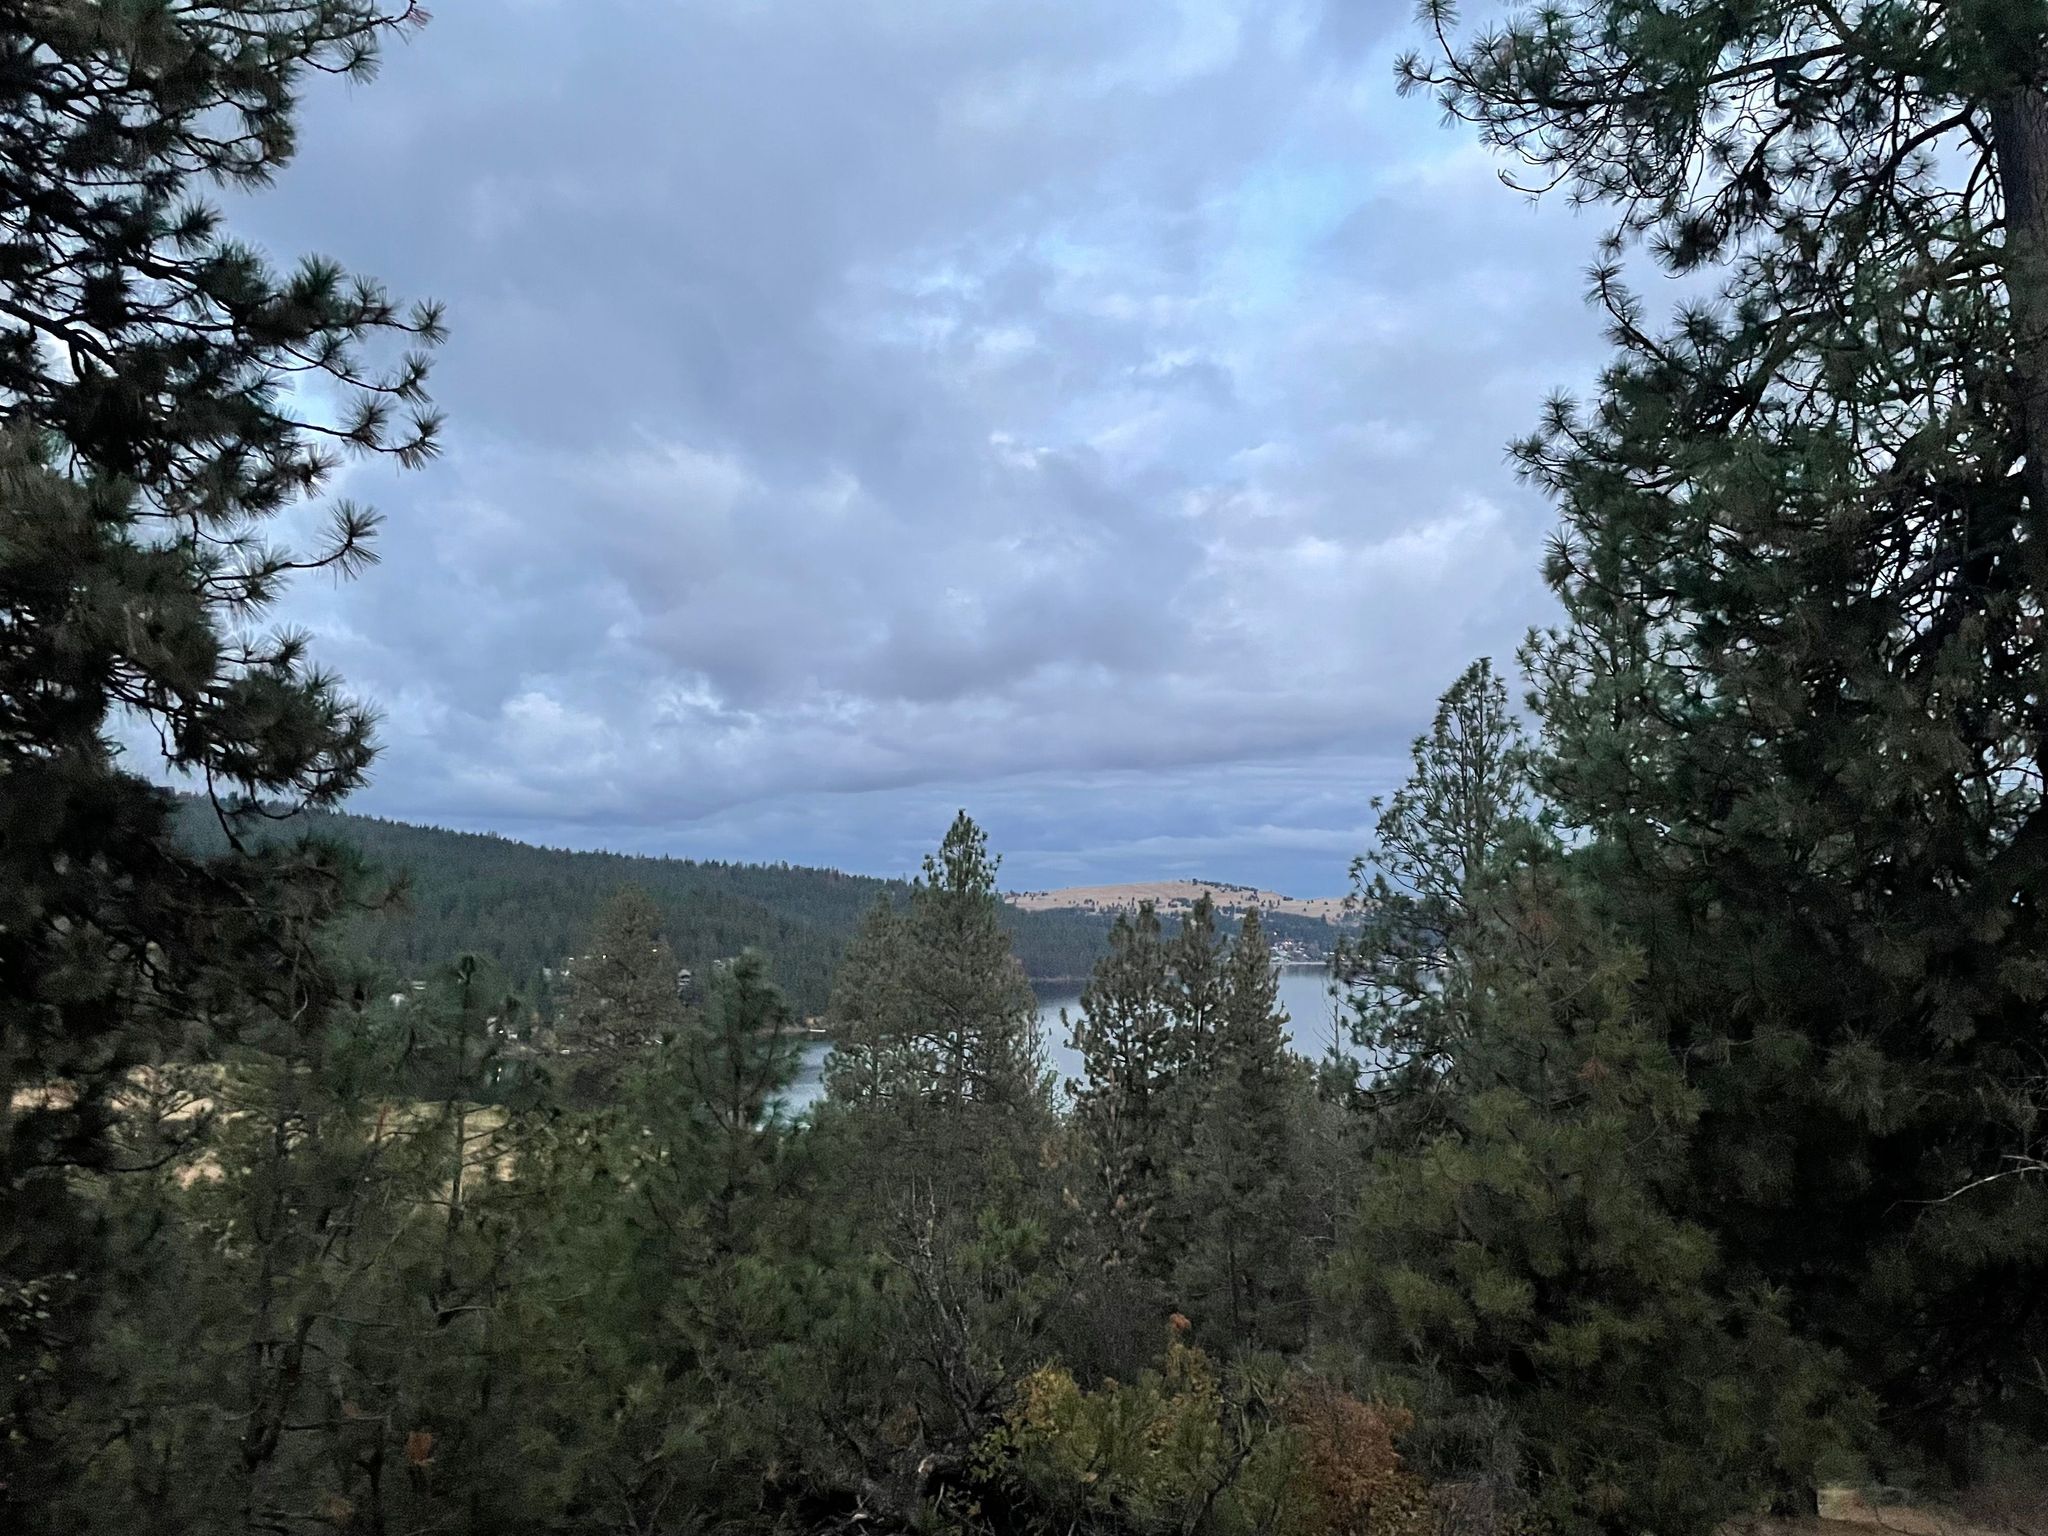 Looking down on Liberty Lake from a trail in the park